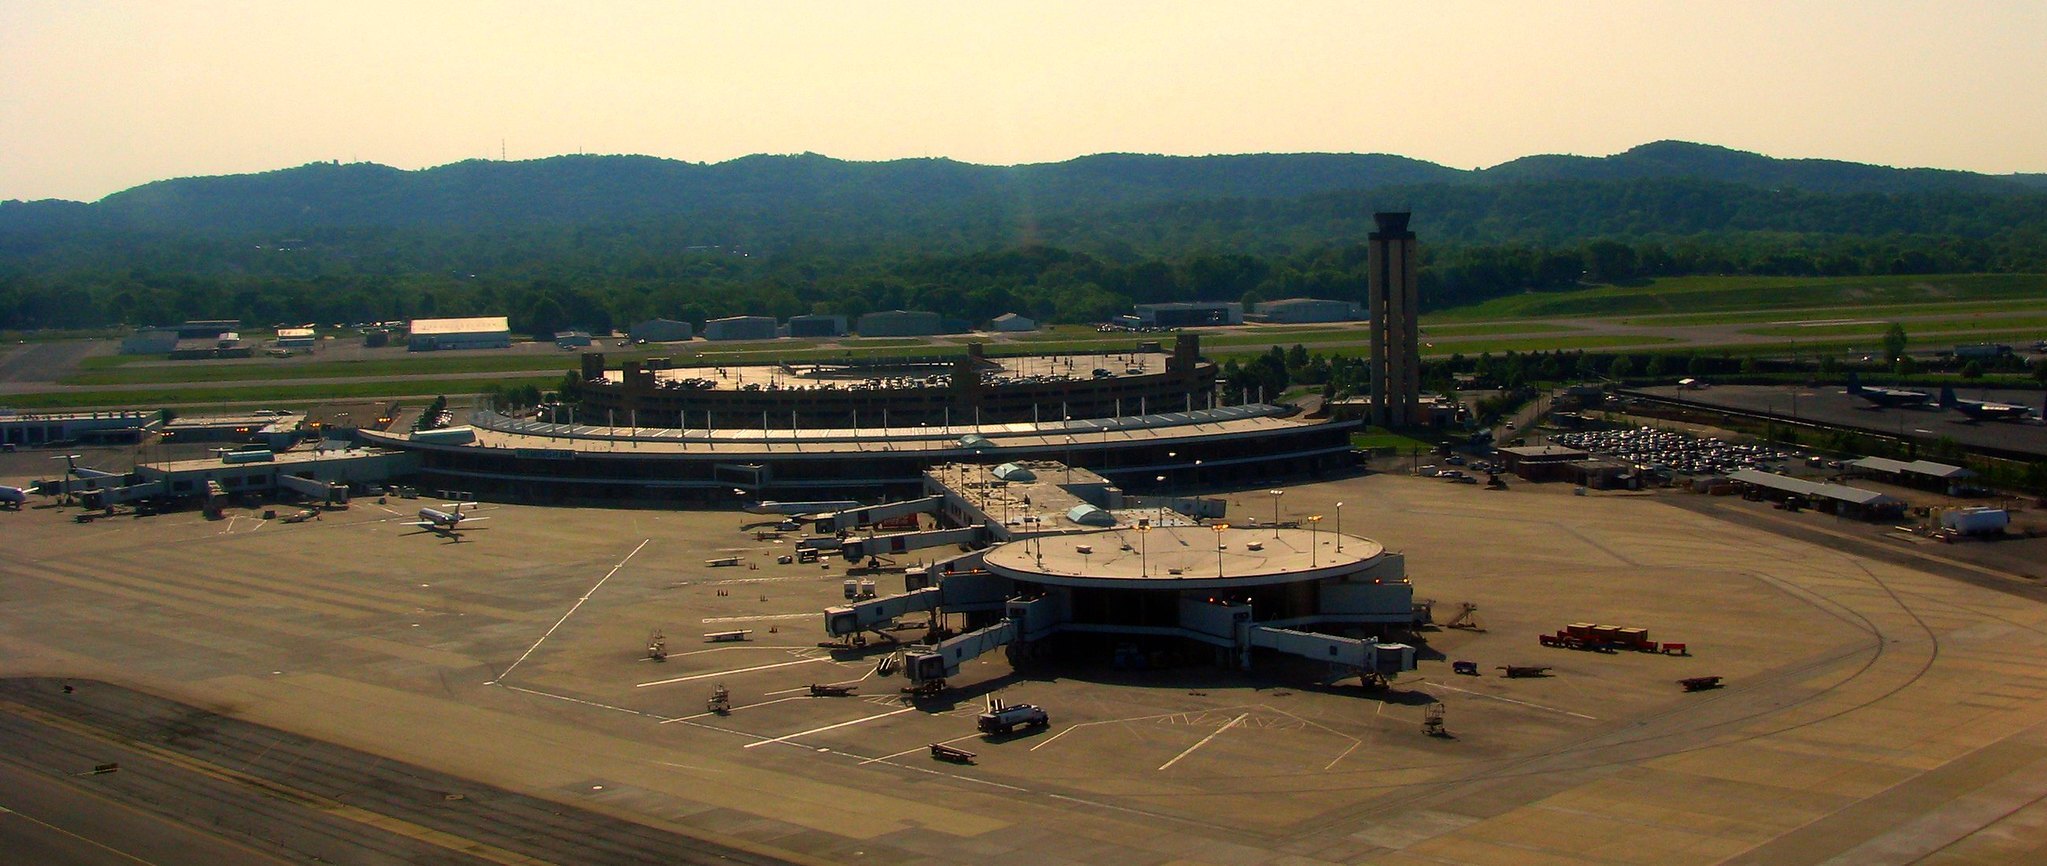 BHM airport by Curtis Palmer via Flickr/Creative Commons